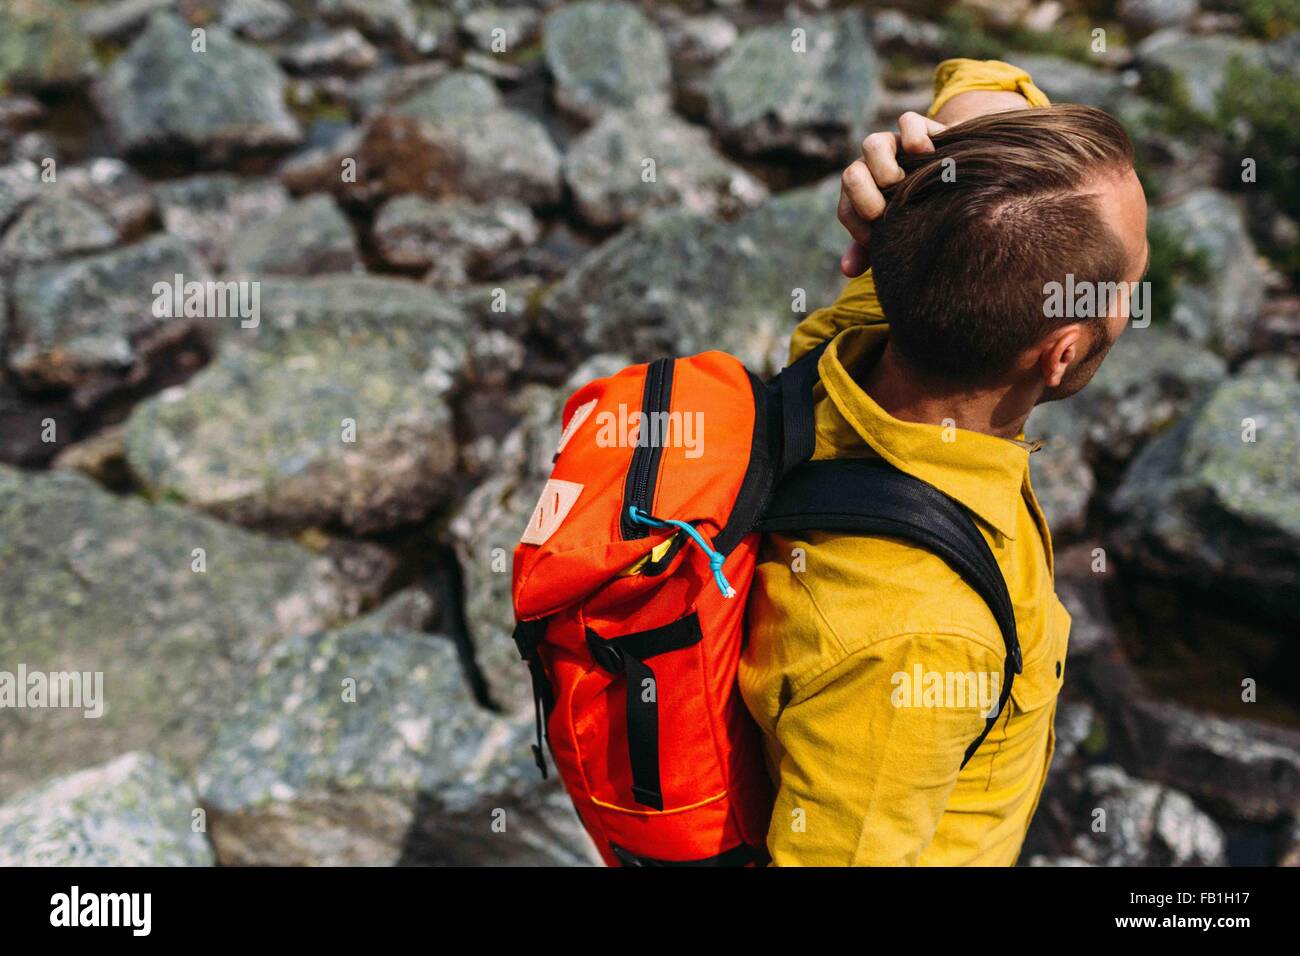 High angle view of mid adult man carrying orange colour backpack, Moraine lake, Banff National Park, Alberta Canada Stock Photo